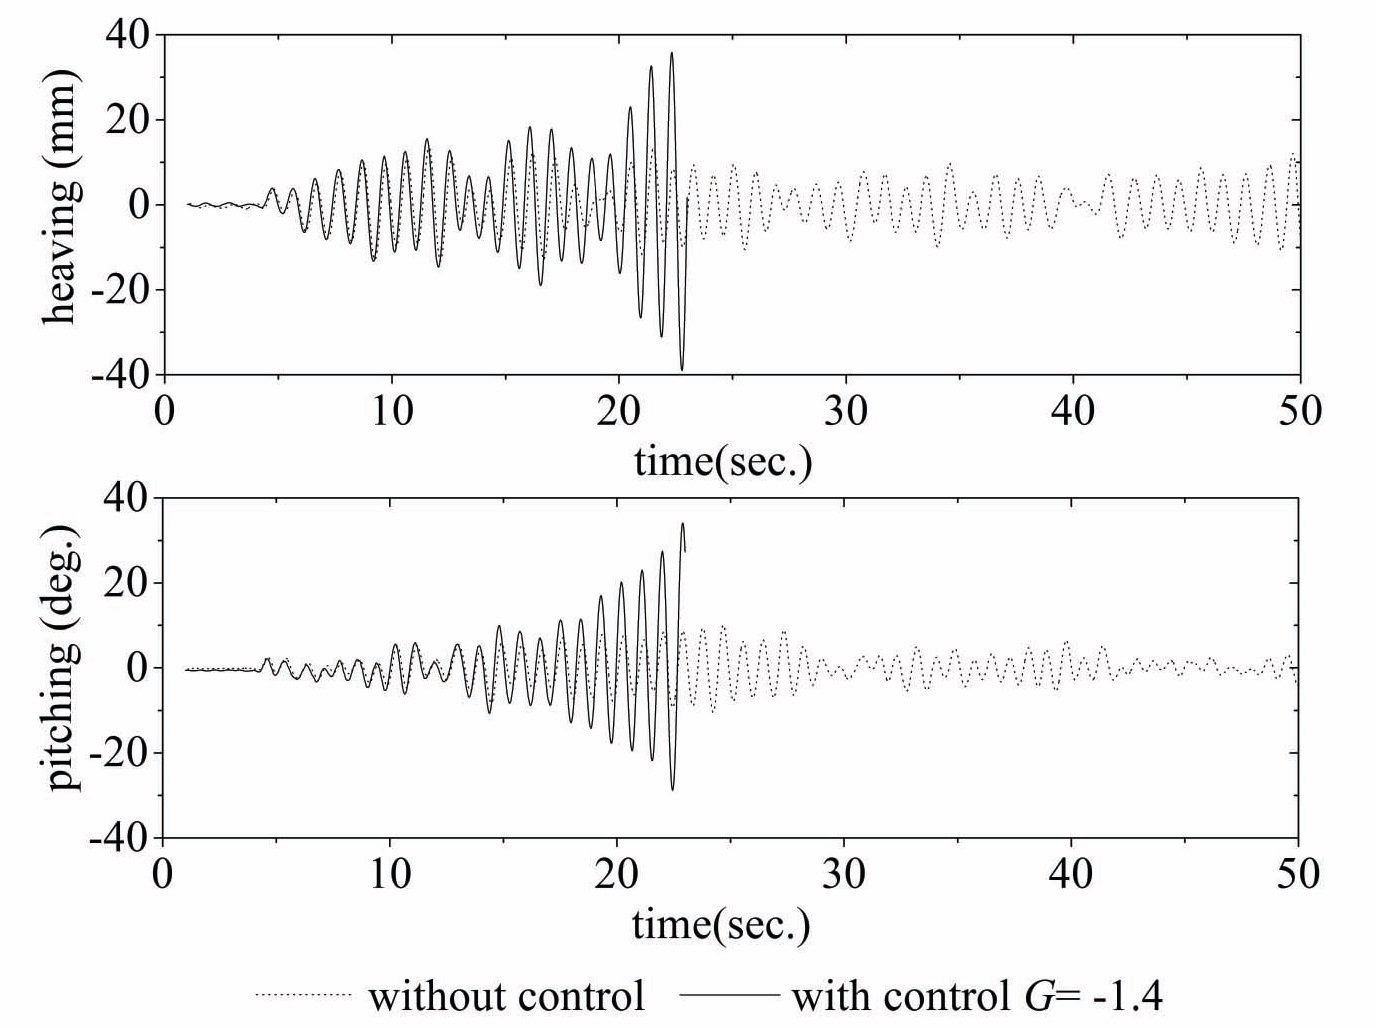 Time trace, without control G = 0 and with control G = -1.4 at U/(ωαb)=3.38